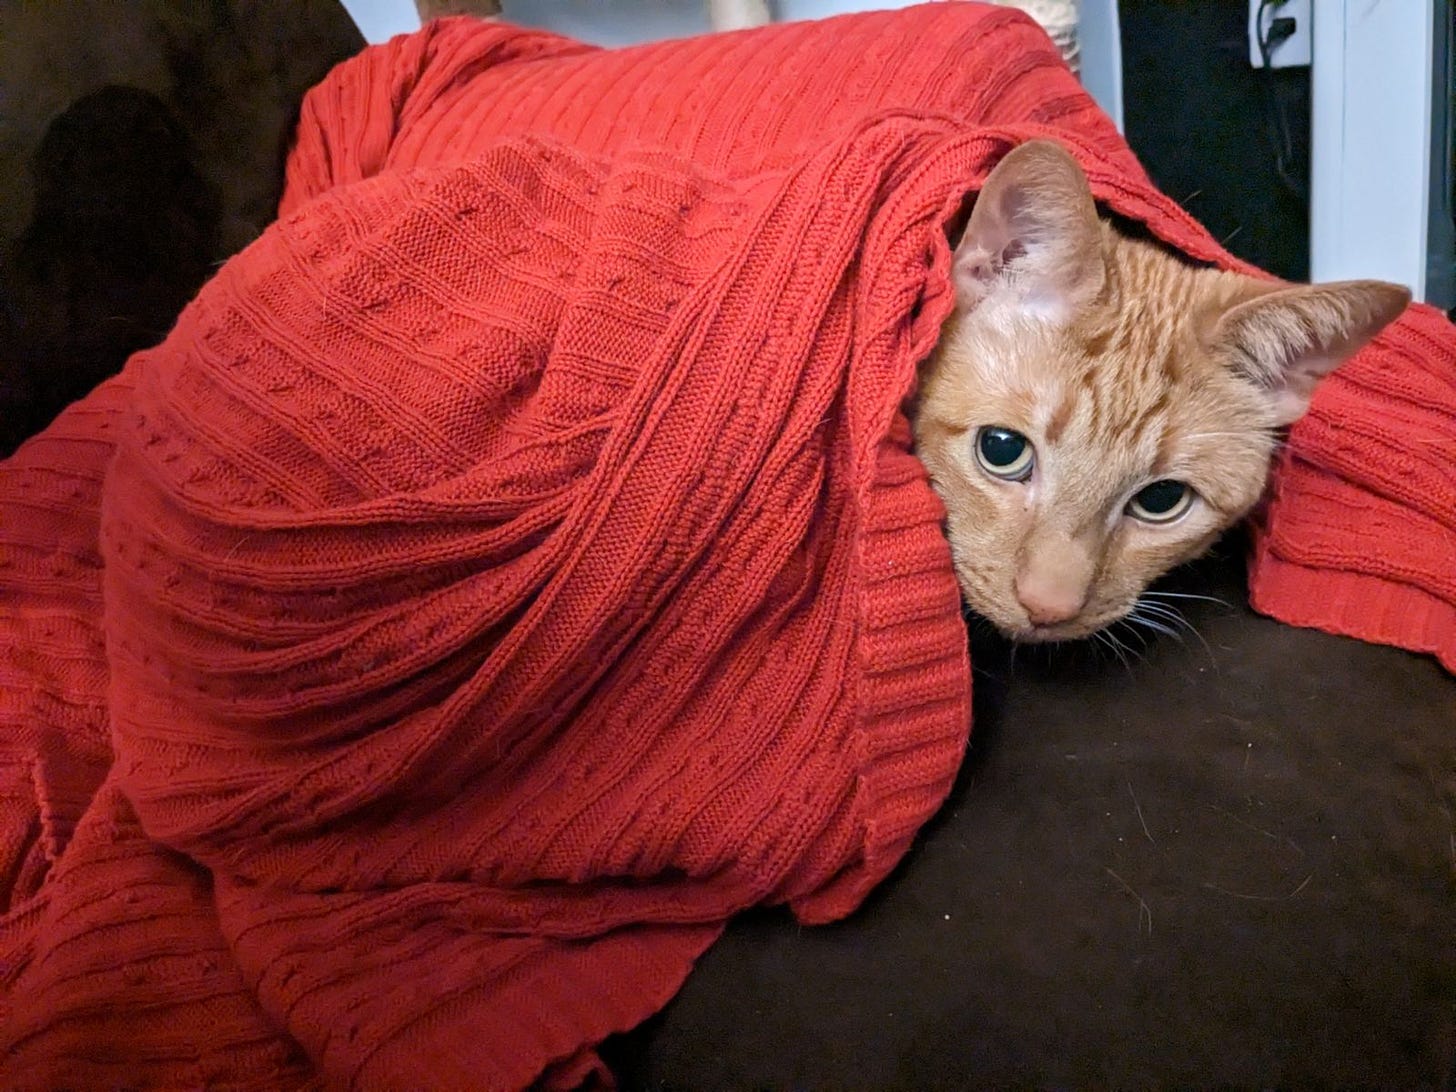 A ginger cat wrapped up in a red blanket...red as a fire engine